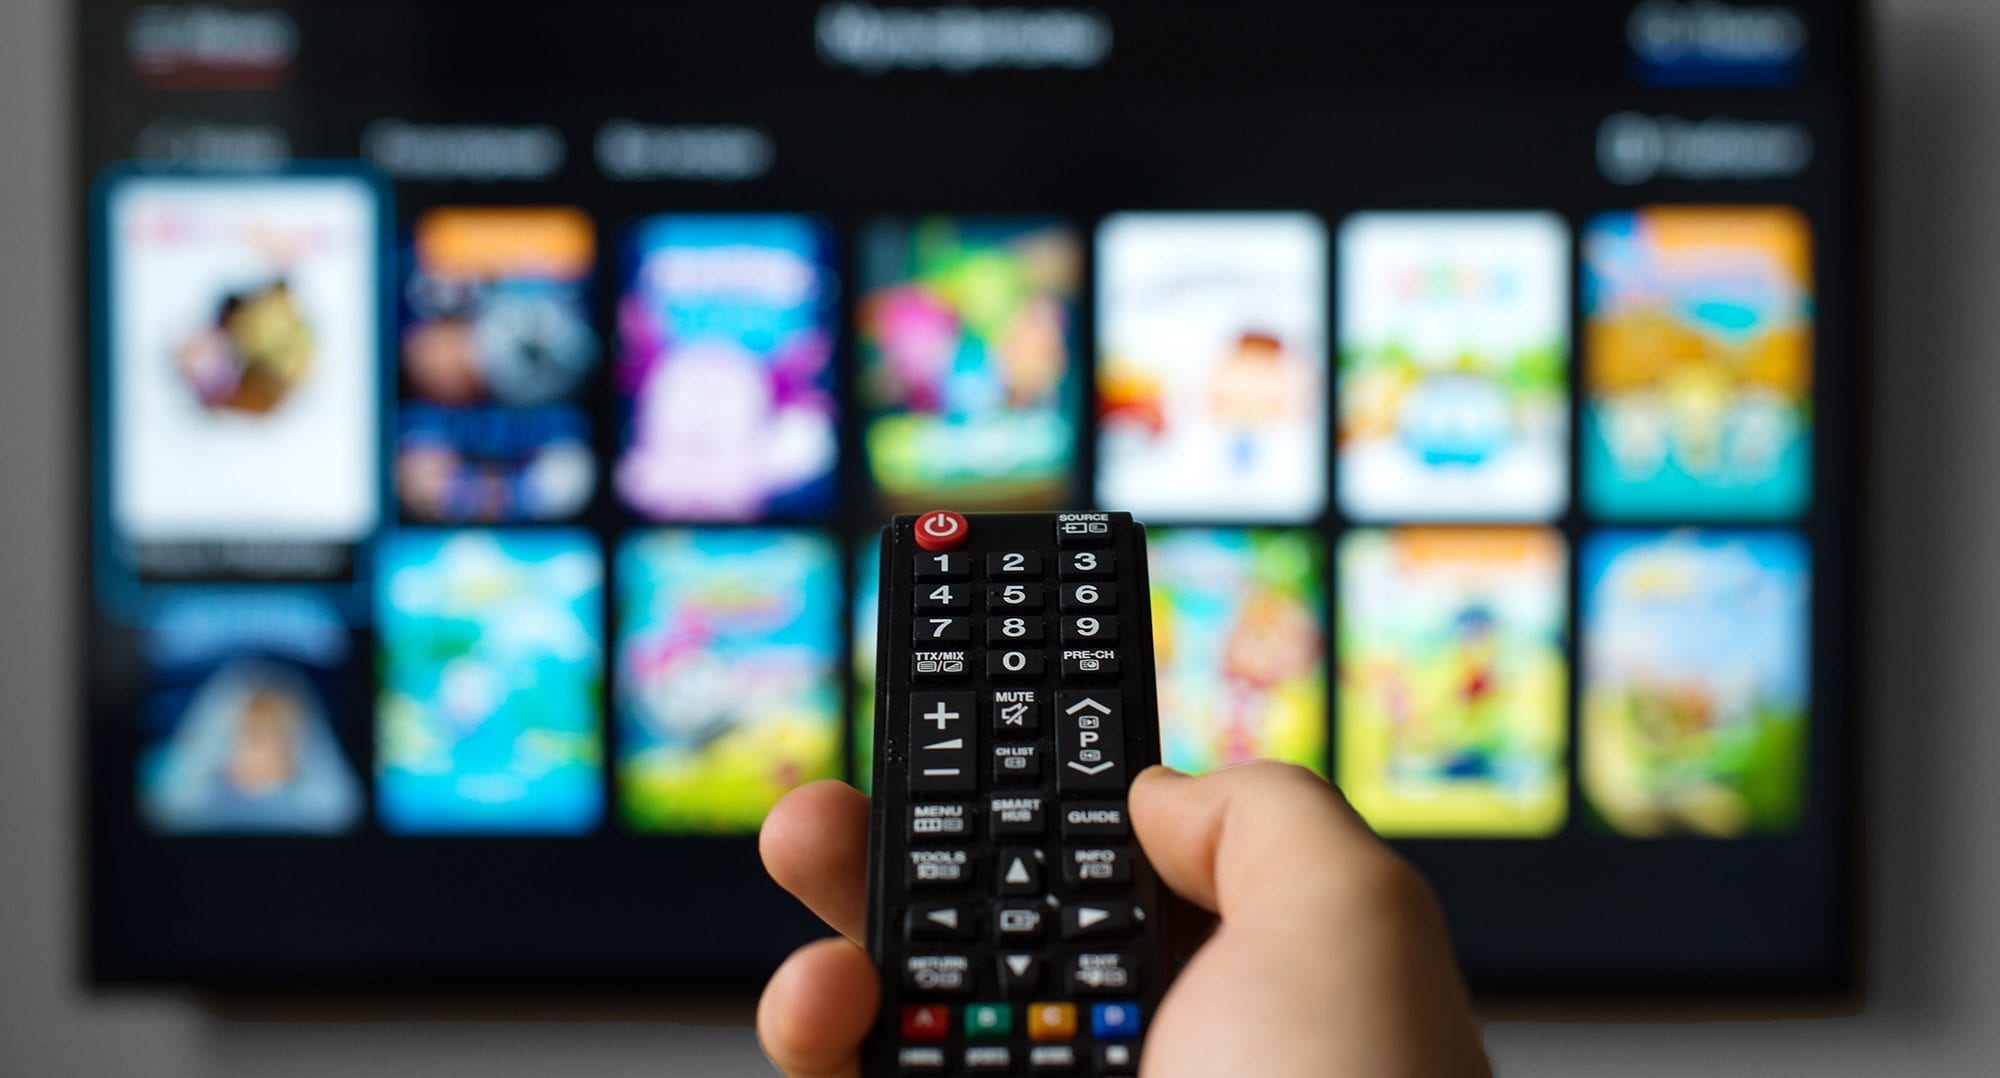 Most Smart TVs come with a handful of apps. For the ultimate TV experience, you need a solid Android TV box. These may be exactly what you need.